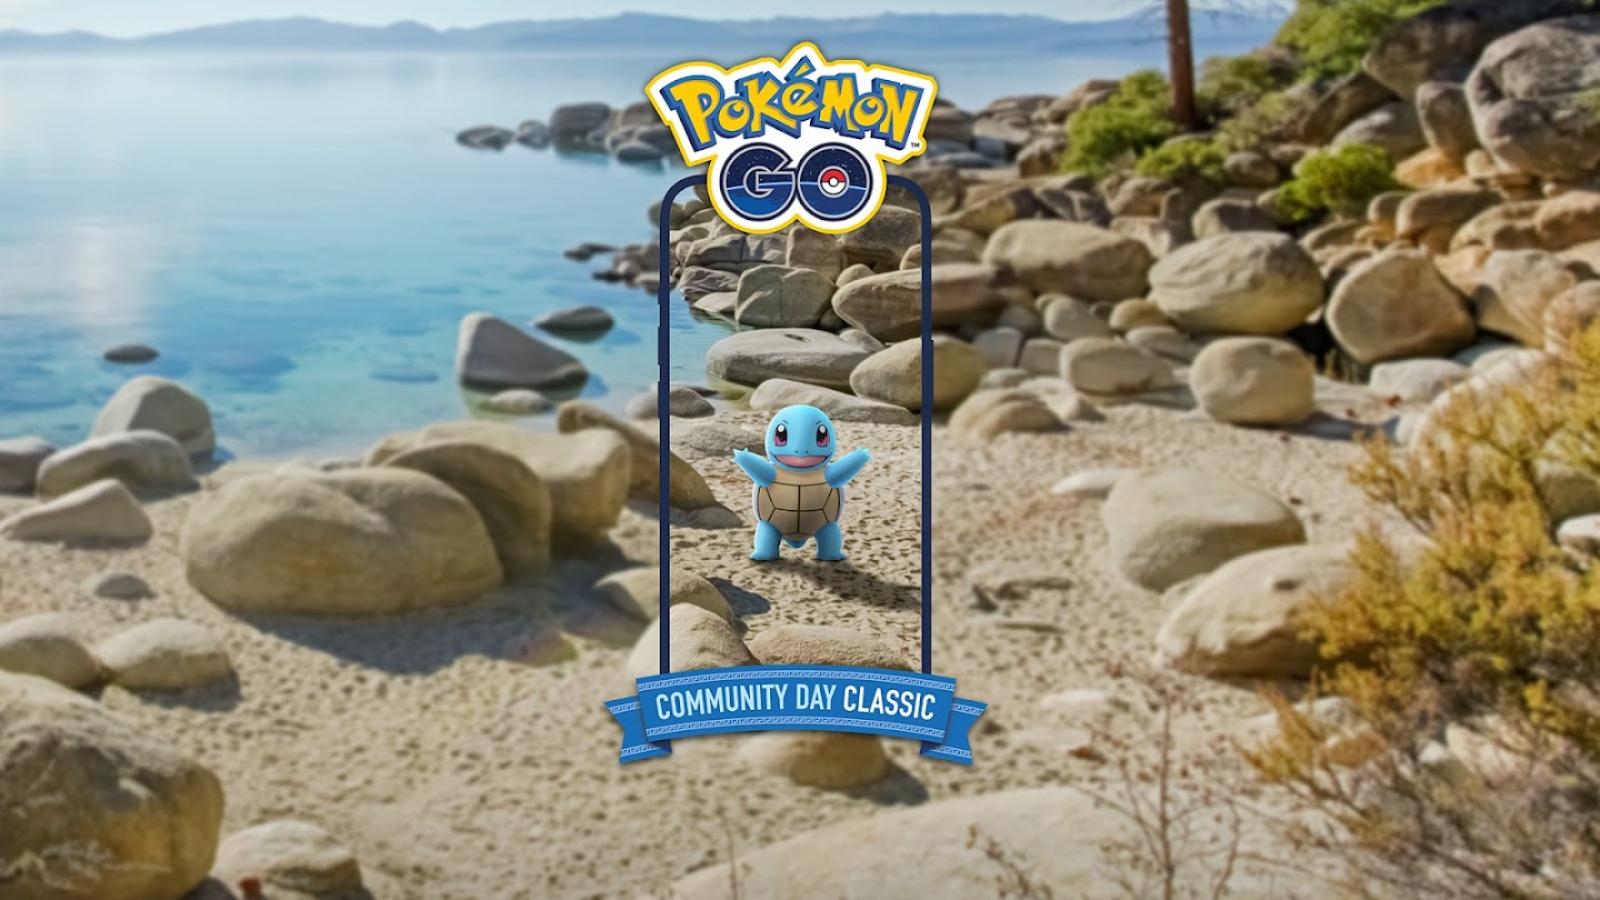 Pokemon Go Squirtle Community Day Classic Start time, exclusive move